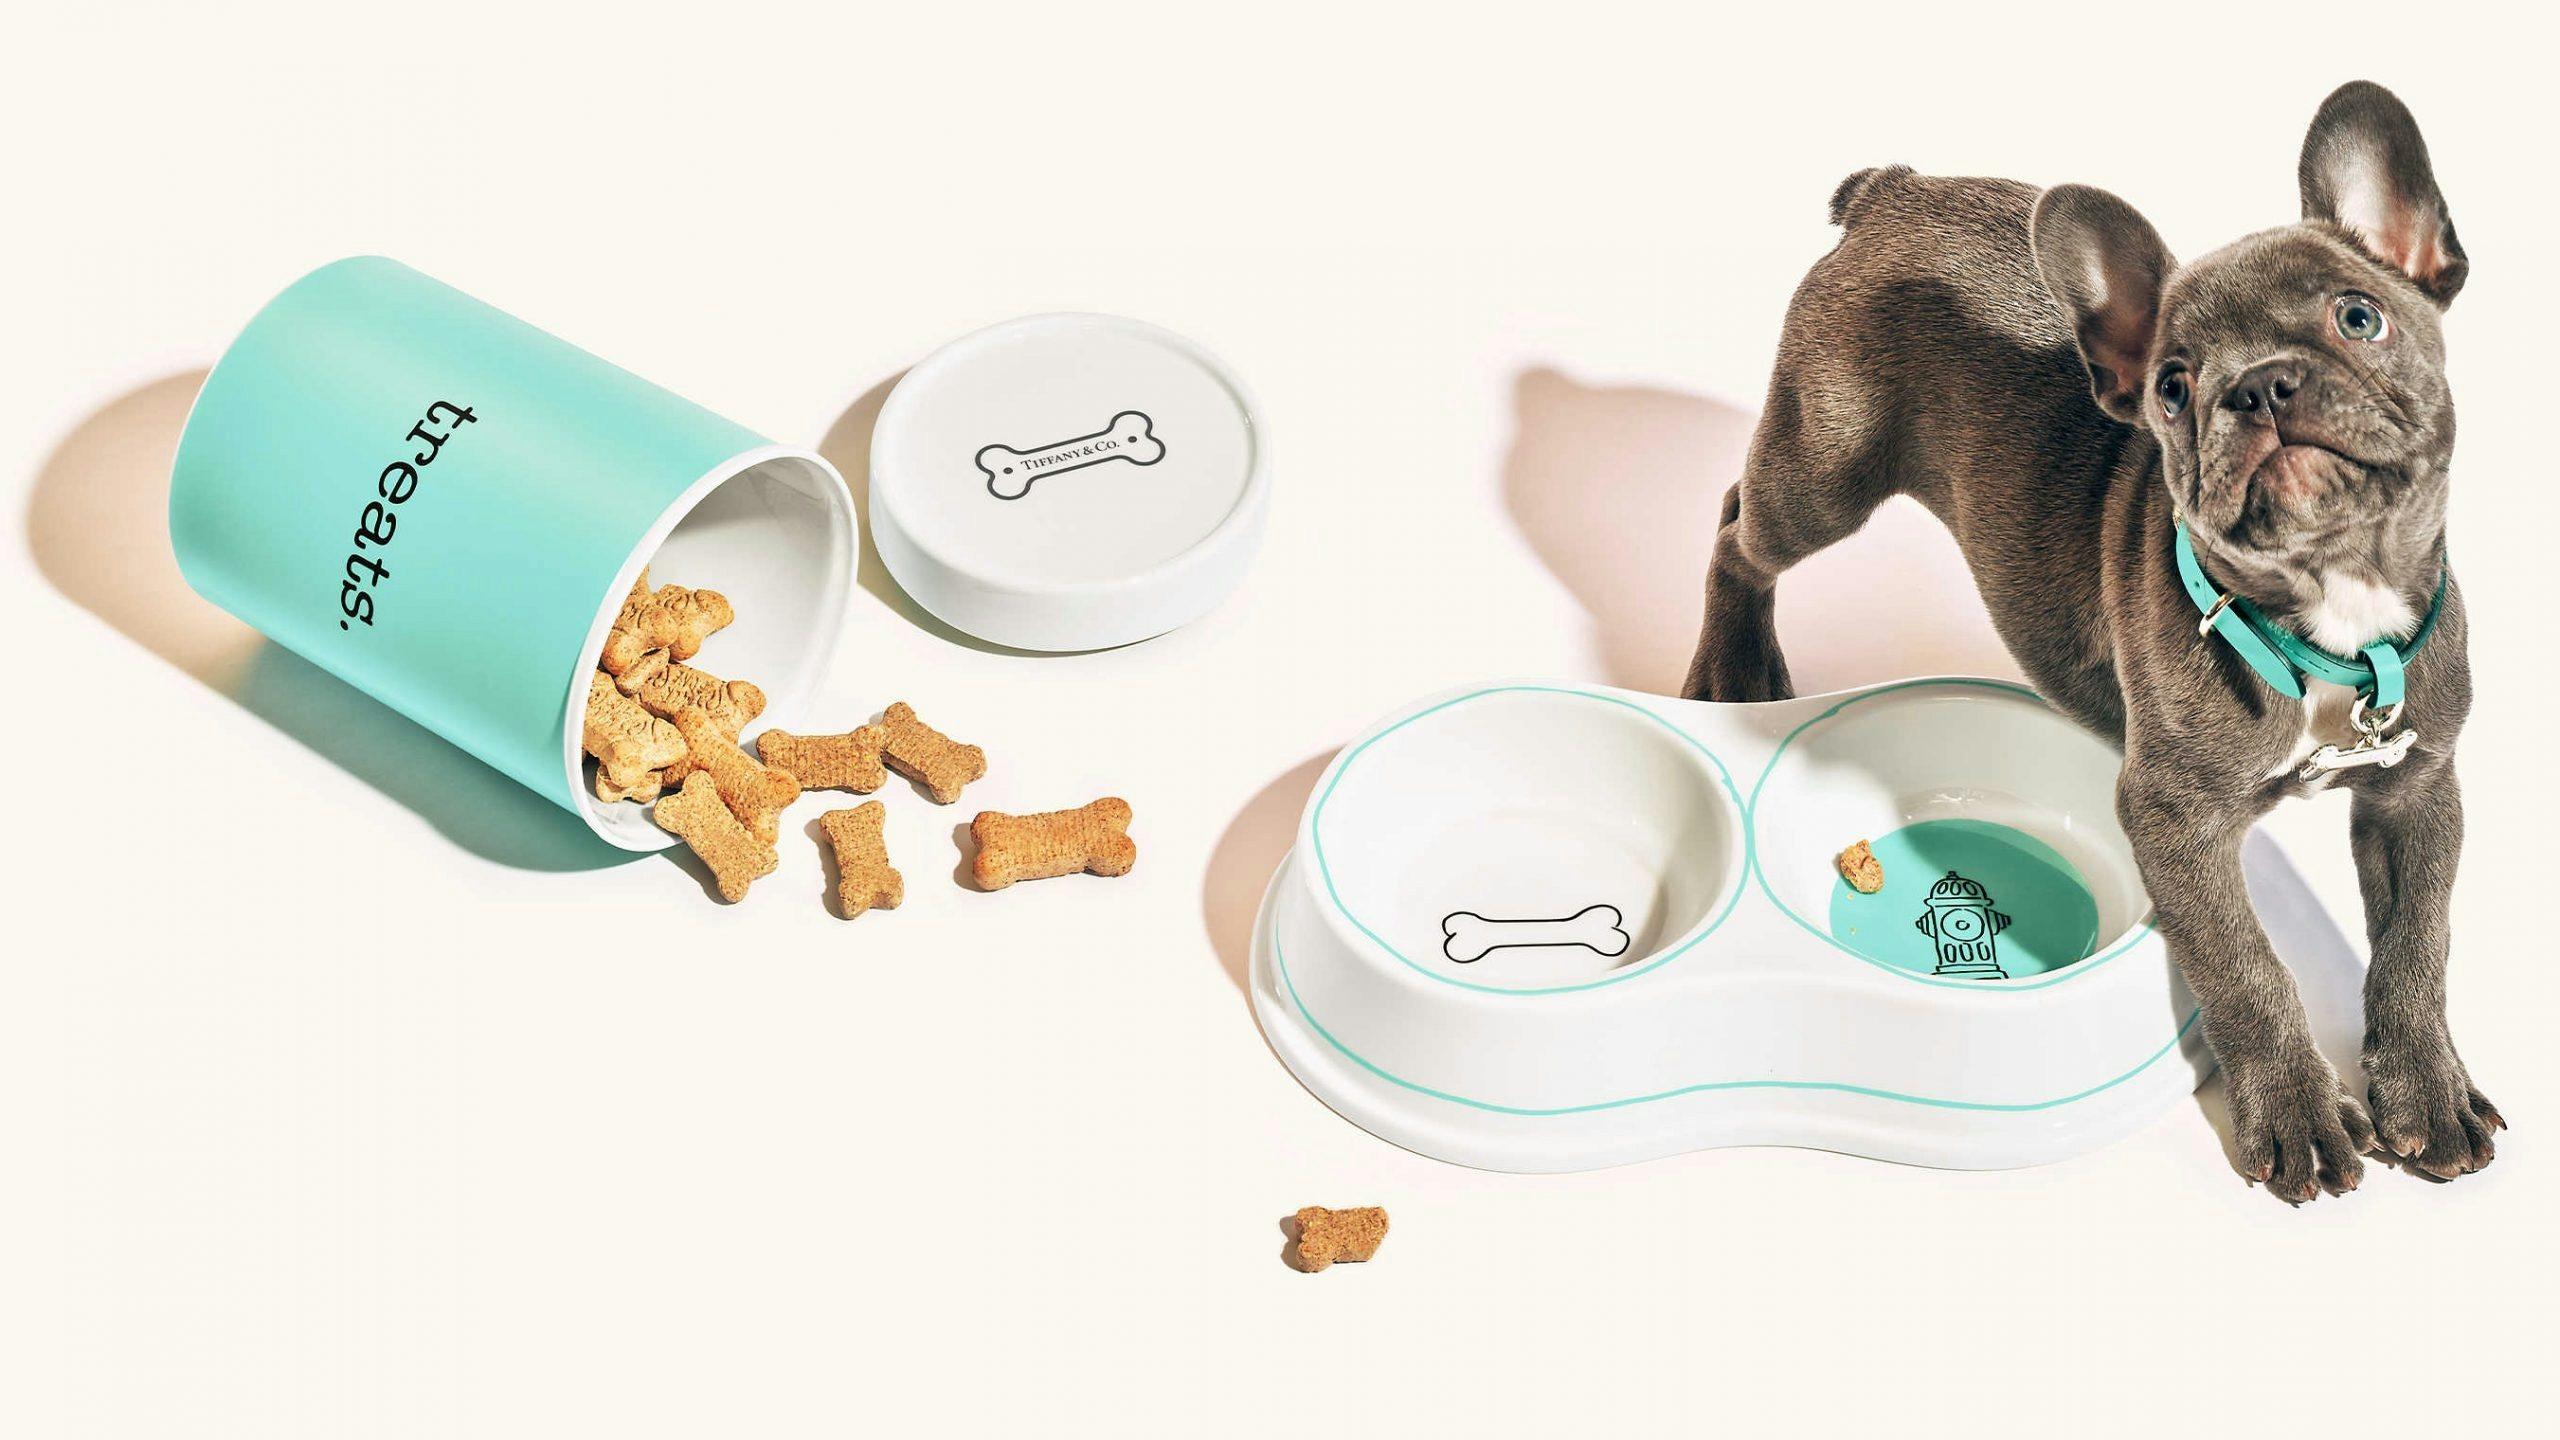 Pet fashion sales have been booming in China, and luxury brands need to be ready to take full advantage of this trend. Photo: Courtesy of Tiffany & Co.